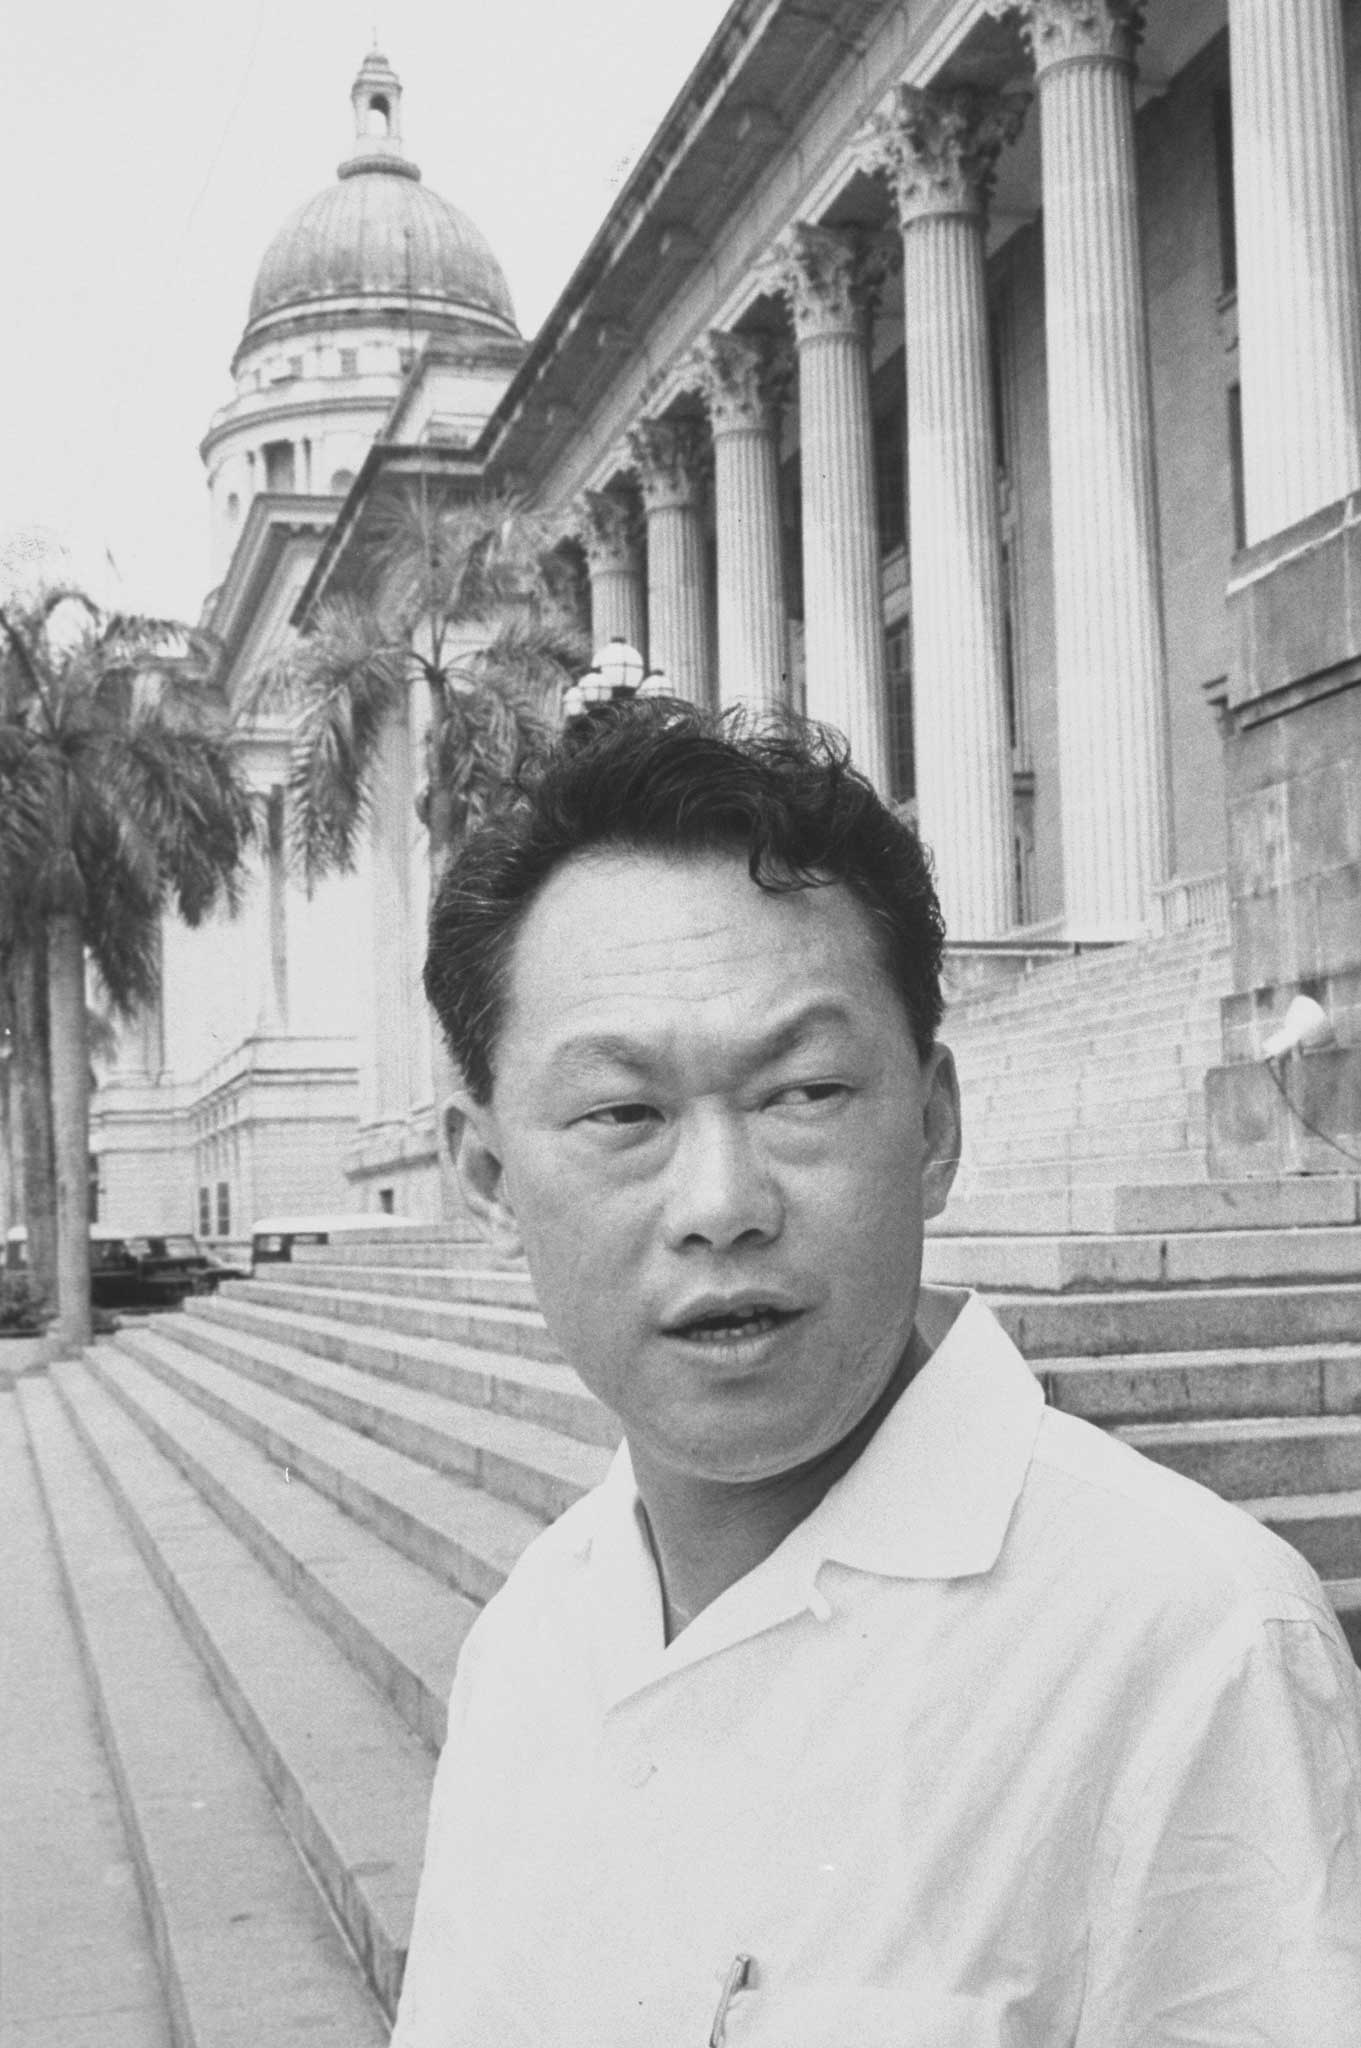 Gallery: "Father of Singapore" Lee Kuan Yews Life in Pictures | Time